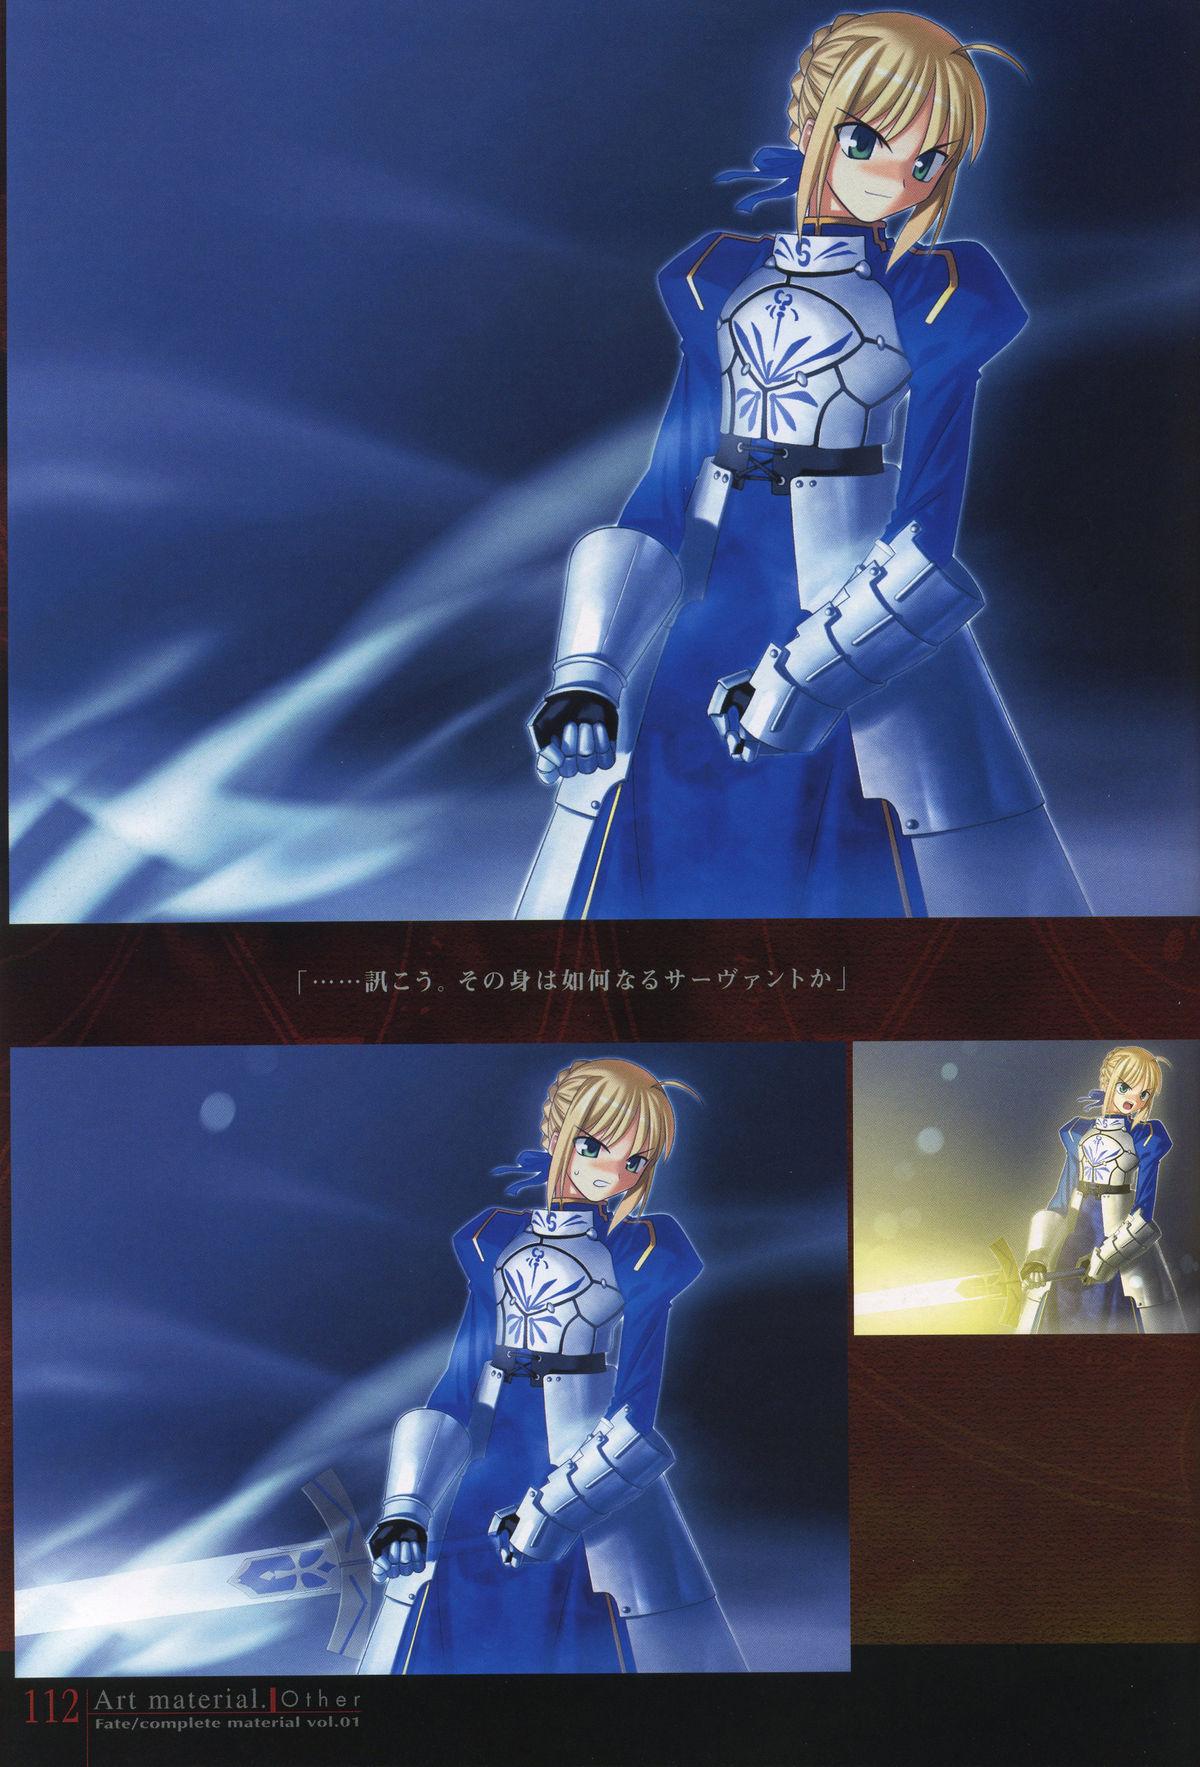 Fate/complete material I - Art material. 116